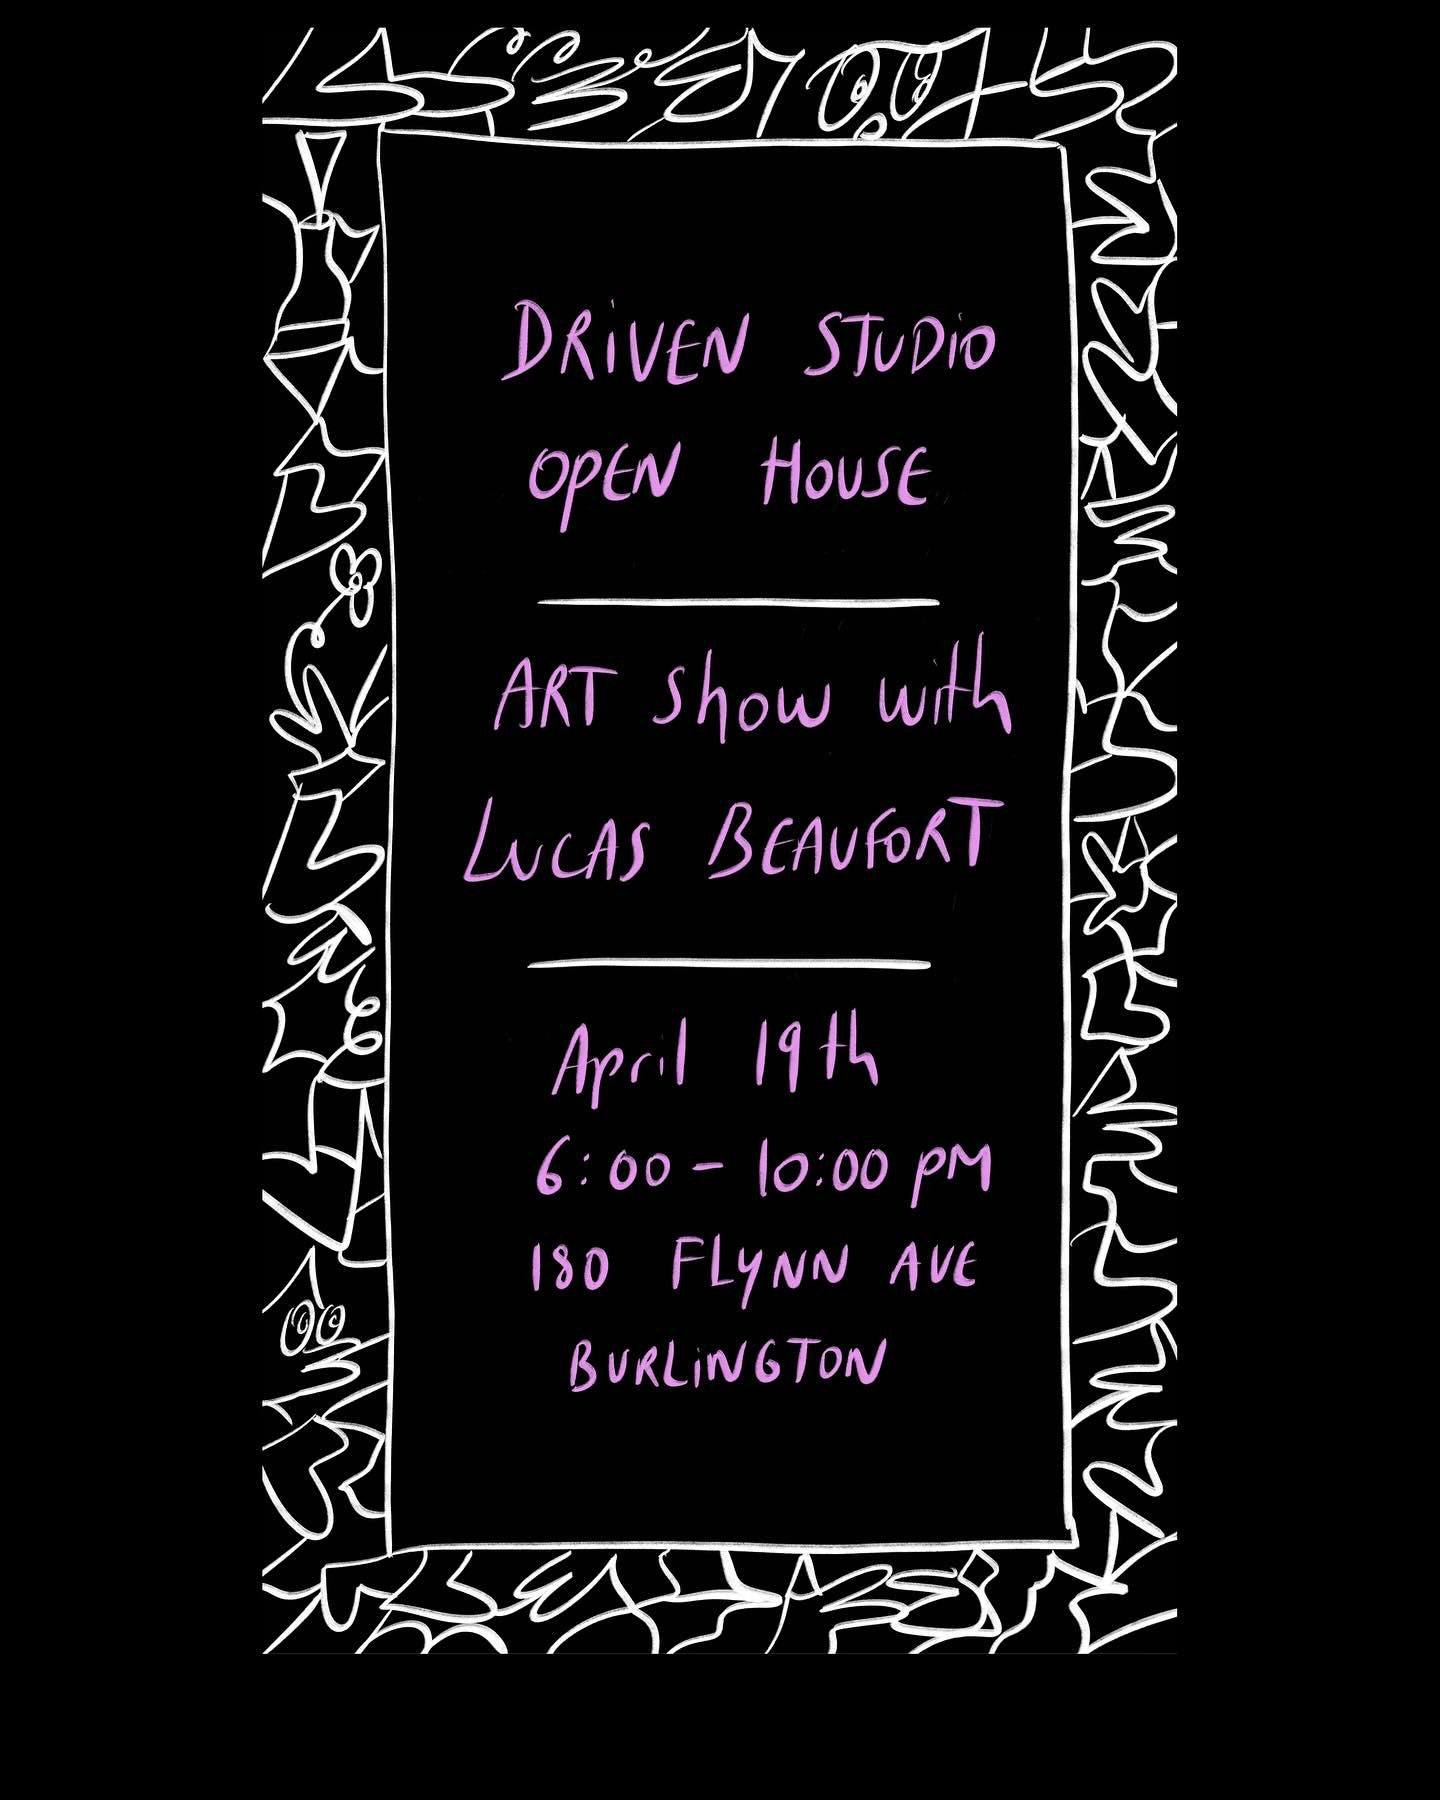 @talentskatepark hopes to see YOU at @driven_studio Open House and art show with @lucas_beaufort !!!
Date: April 19th
Time: 6:00PM - 10:00PM
Fee: FREE and OPEN to the public.
Location: 180 Flynn Ave, Unit 8
Art: Avallable for pre-purchase 
Lucas will